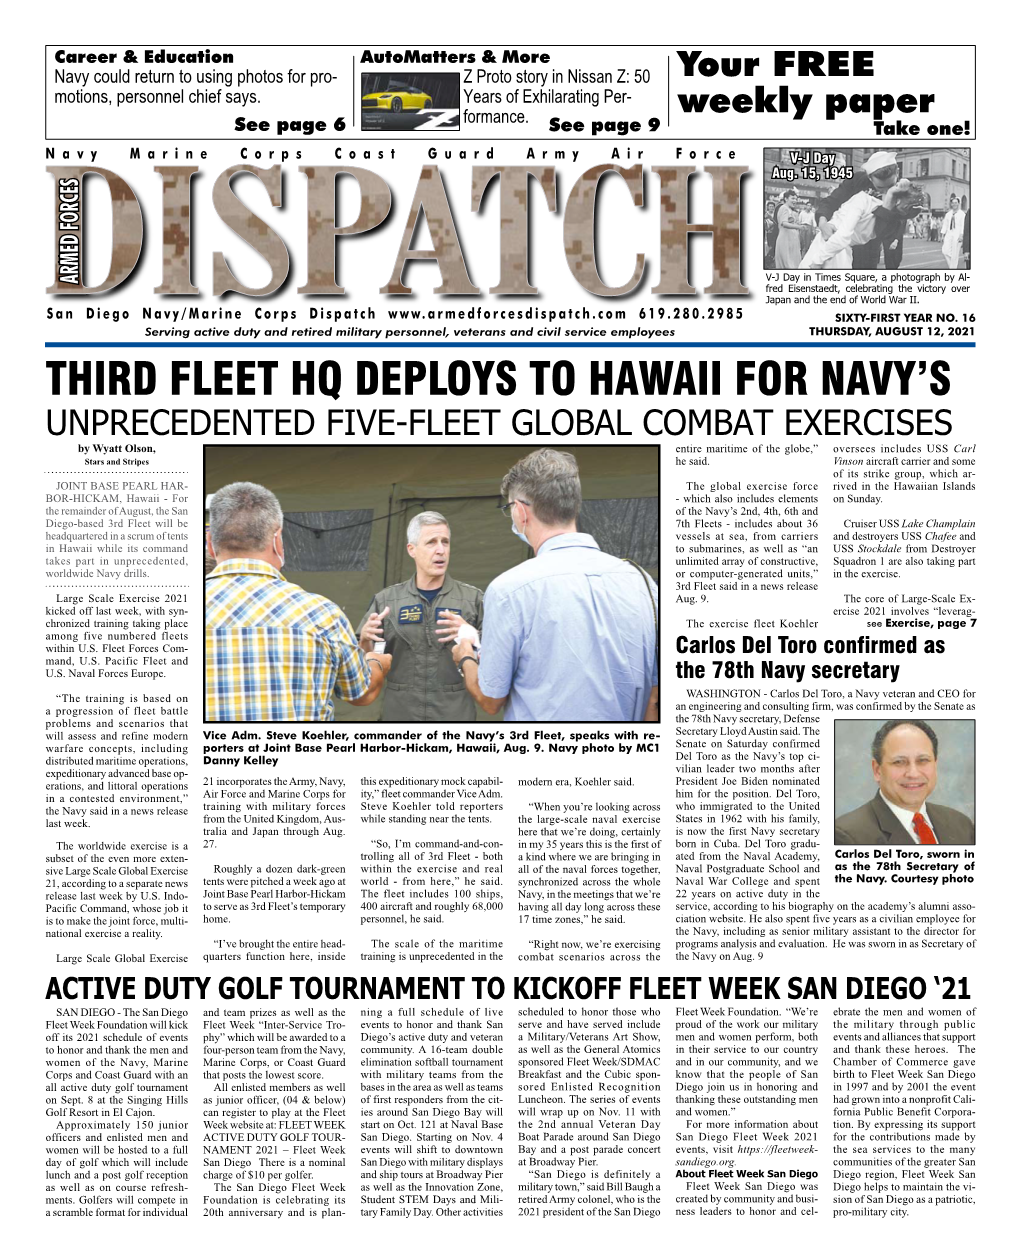 Third Fleet Hq Deploys to Hawaii for Navy's